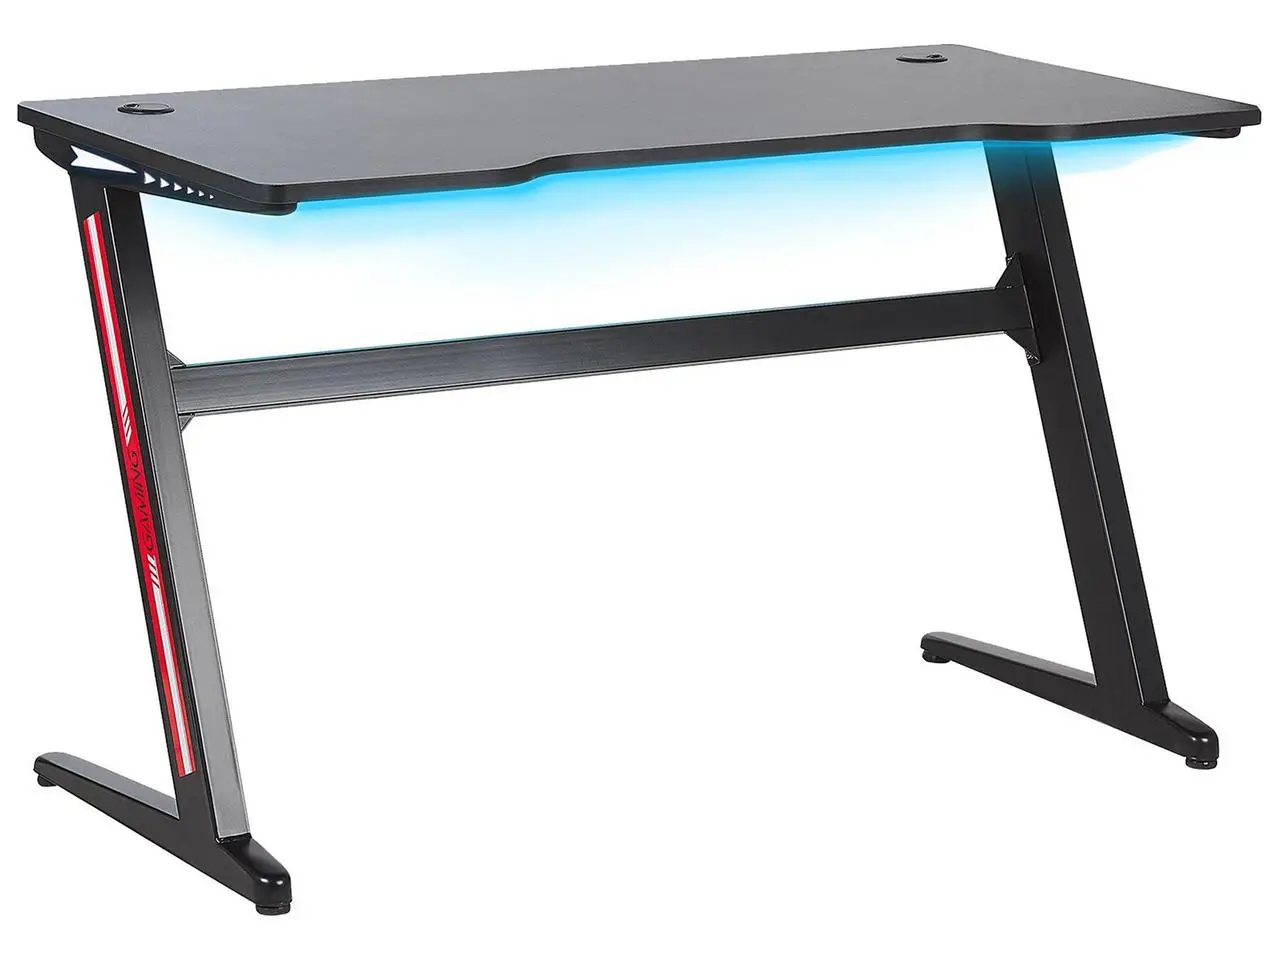 Elevate Your Gaming Setup with the LuminaGamer Pro LED Gaming Table!